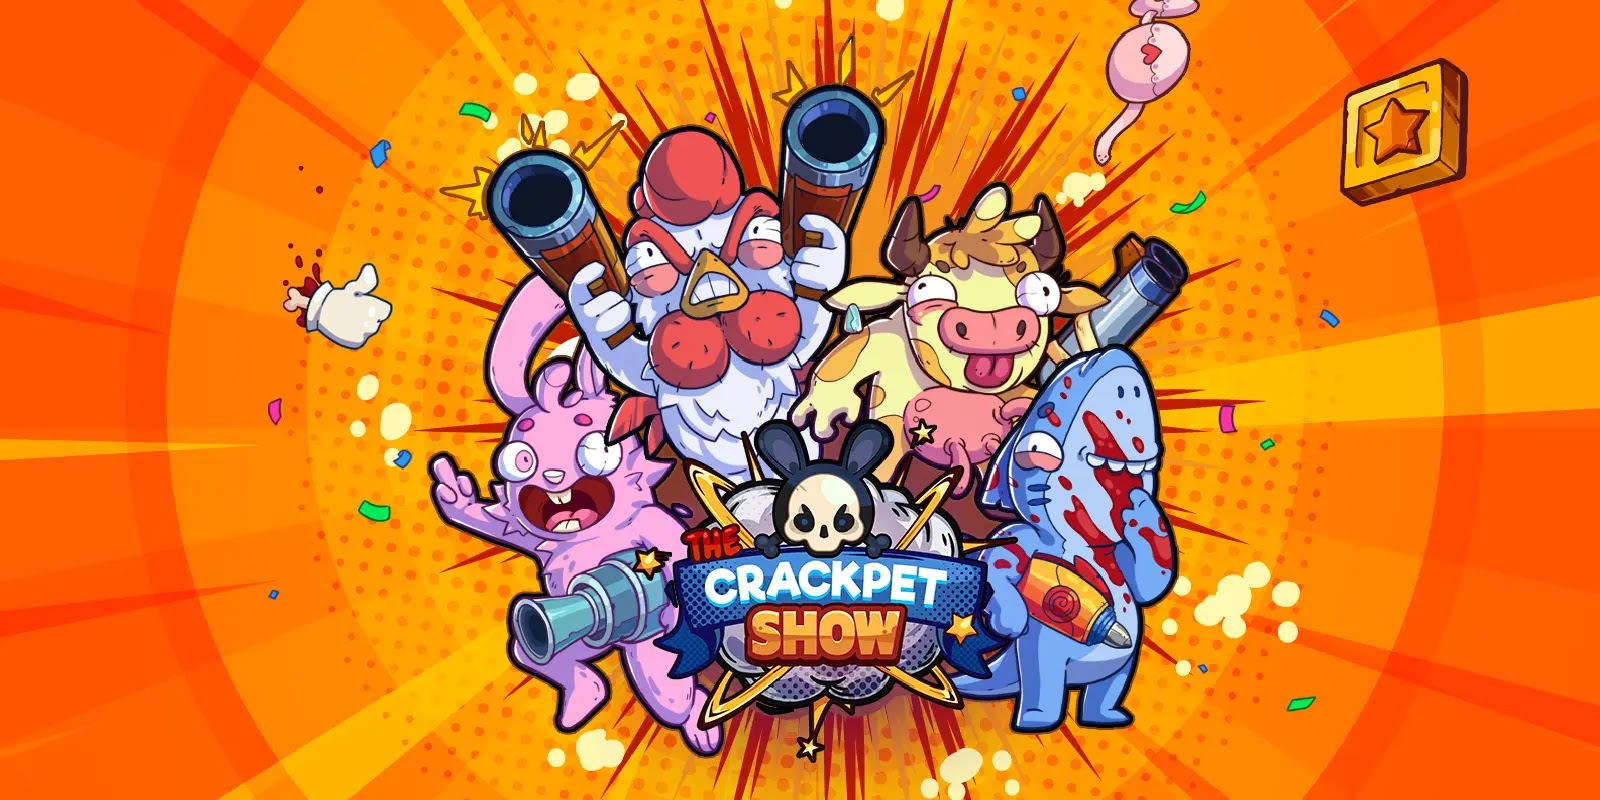 THE CRACKPET SHOW SINKS ITS TEETH ON SWITCH AND PC VIA STEAM DECEMBER 15